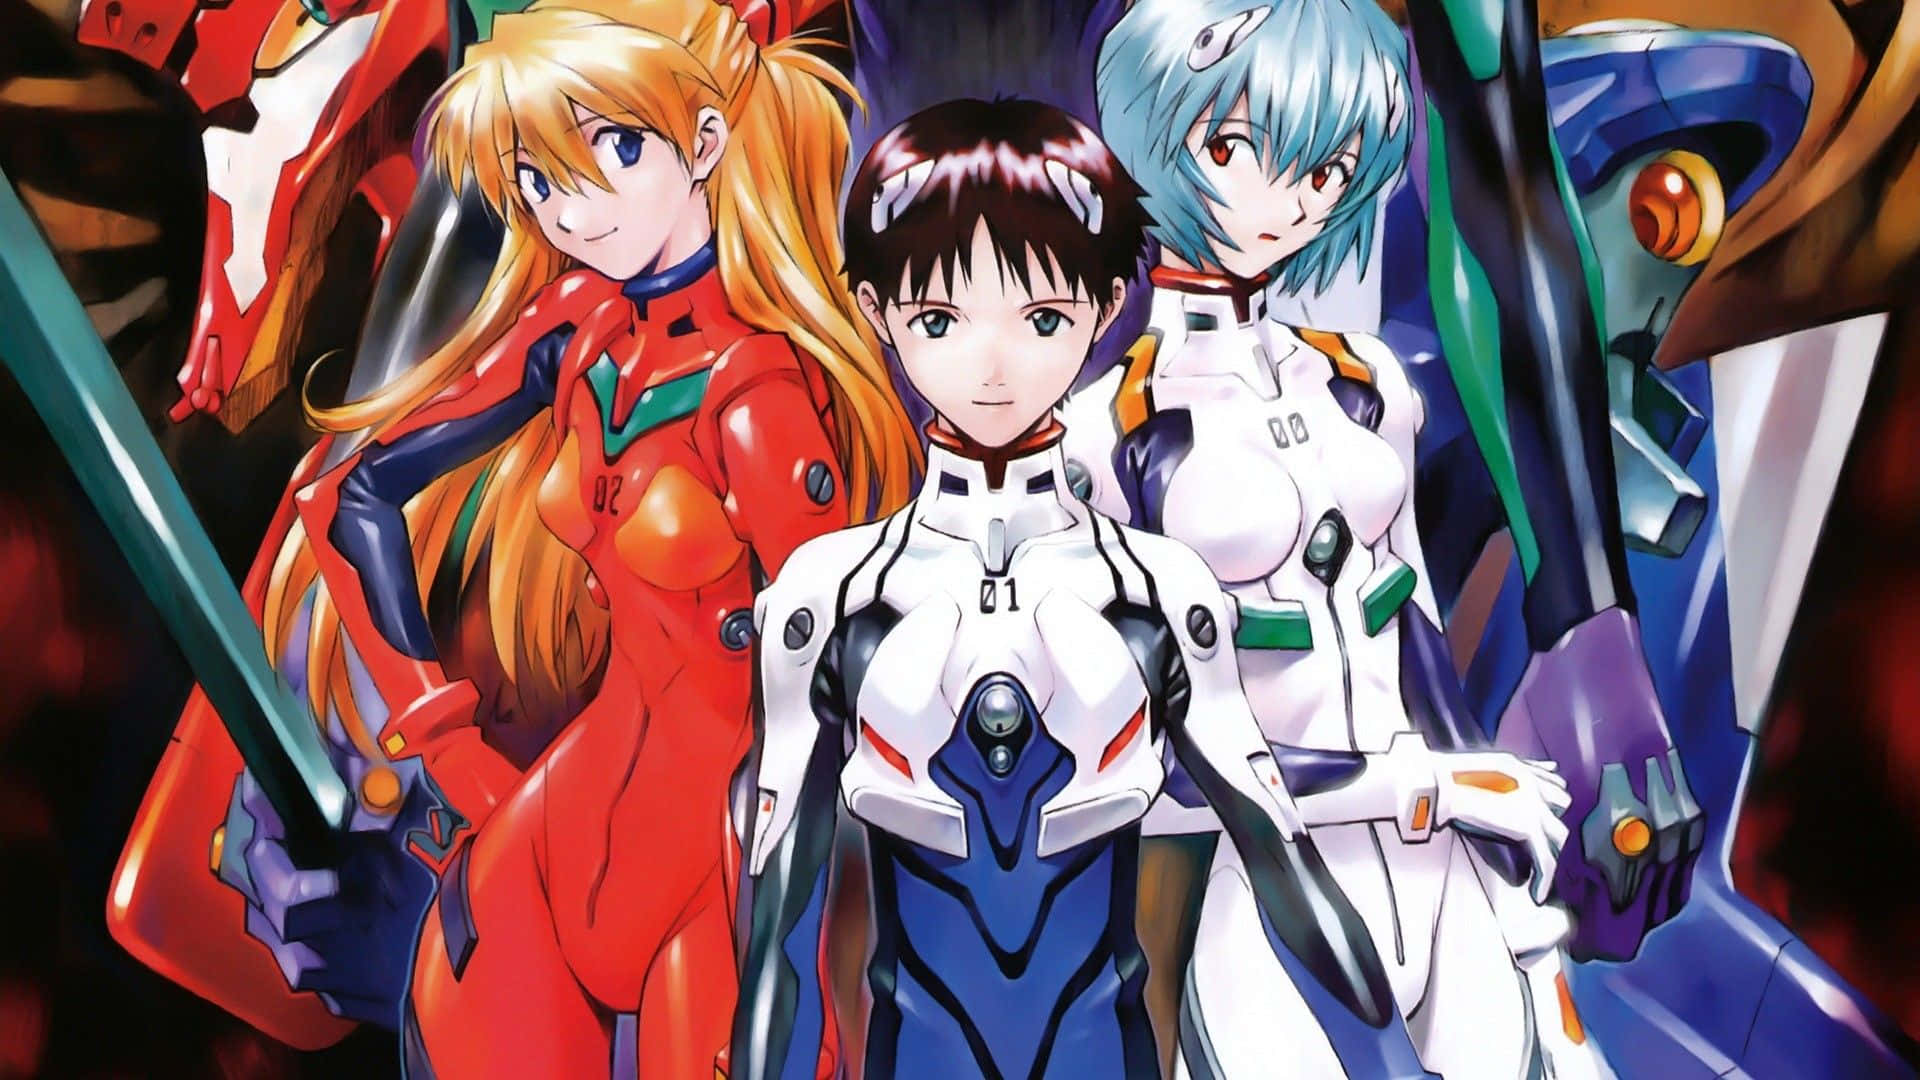 Creation of a new future with Evangelion